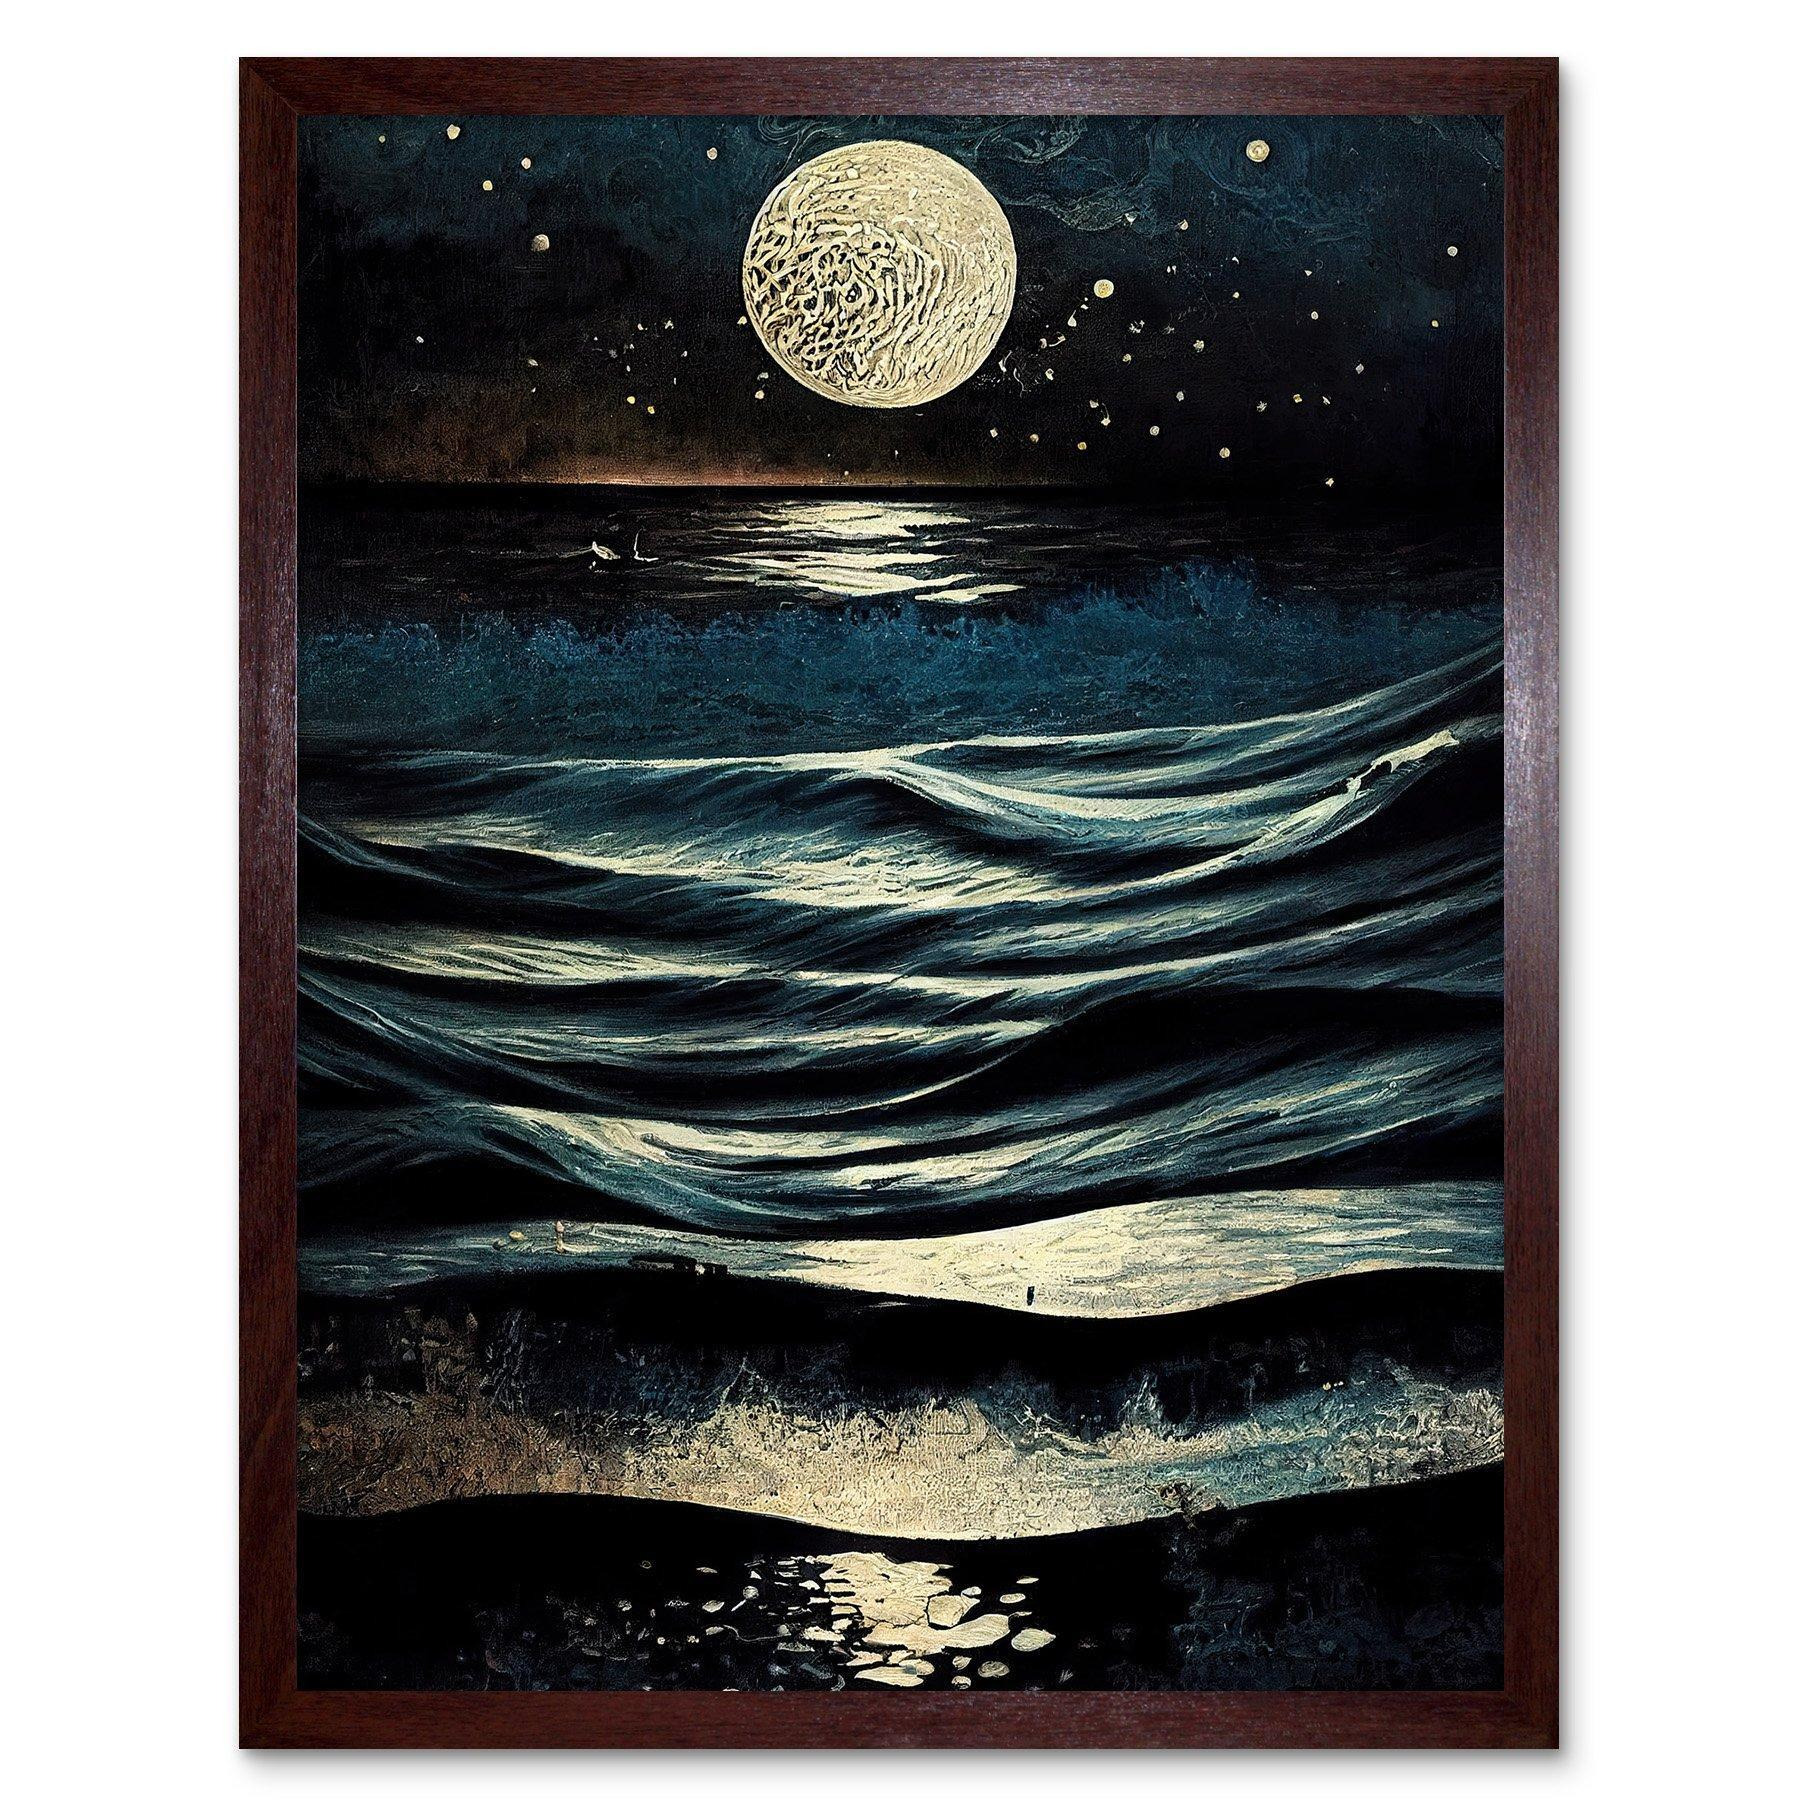 Full Moon Rising Over Clear Night Sky Tidal Waves Art Print Framed Poster Wall Decor 12x16 inch - image 1